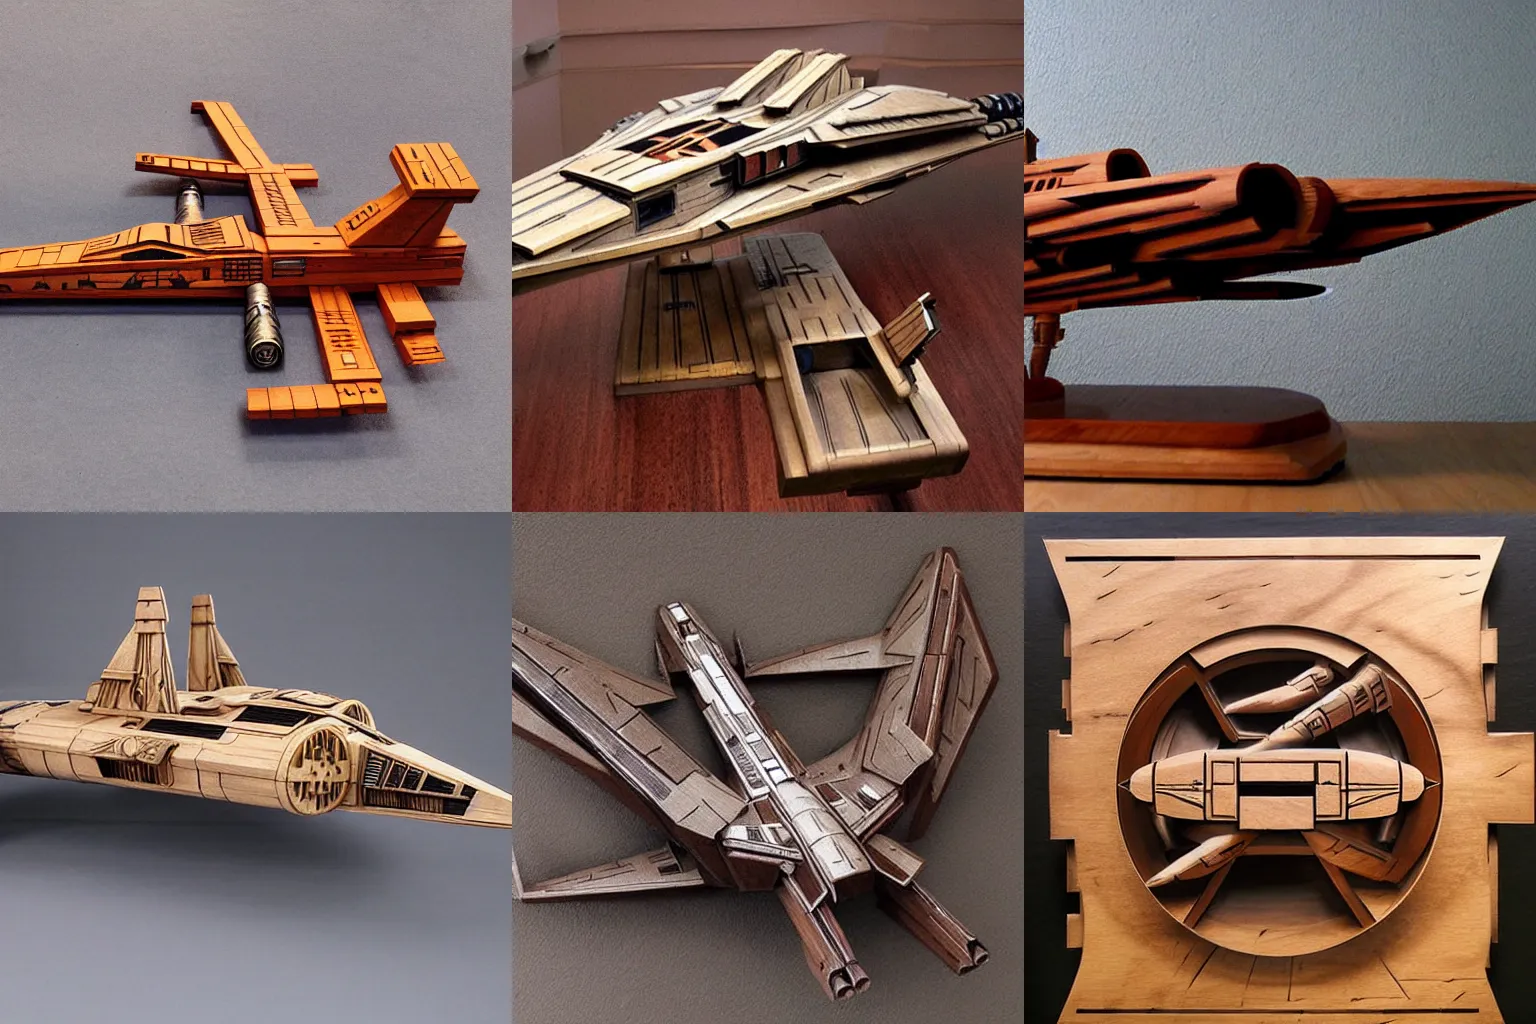 Prompt: photorealistic wood carving of a star wars x - wing spaceship.